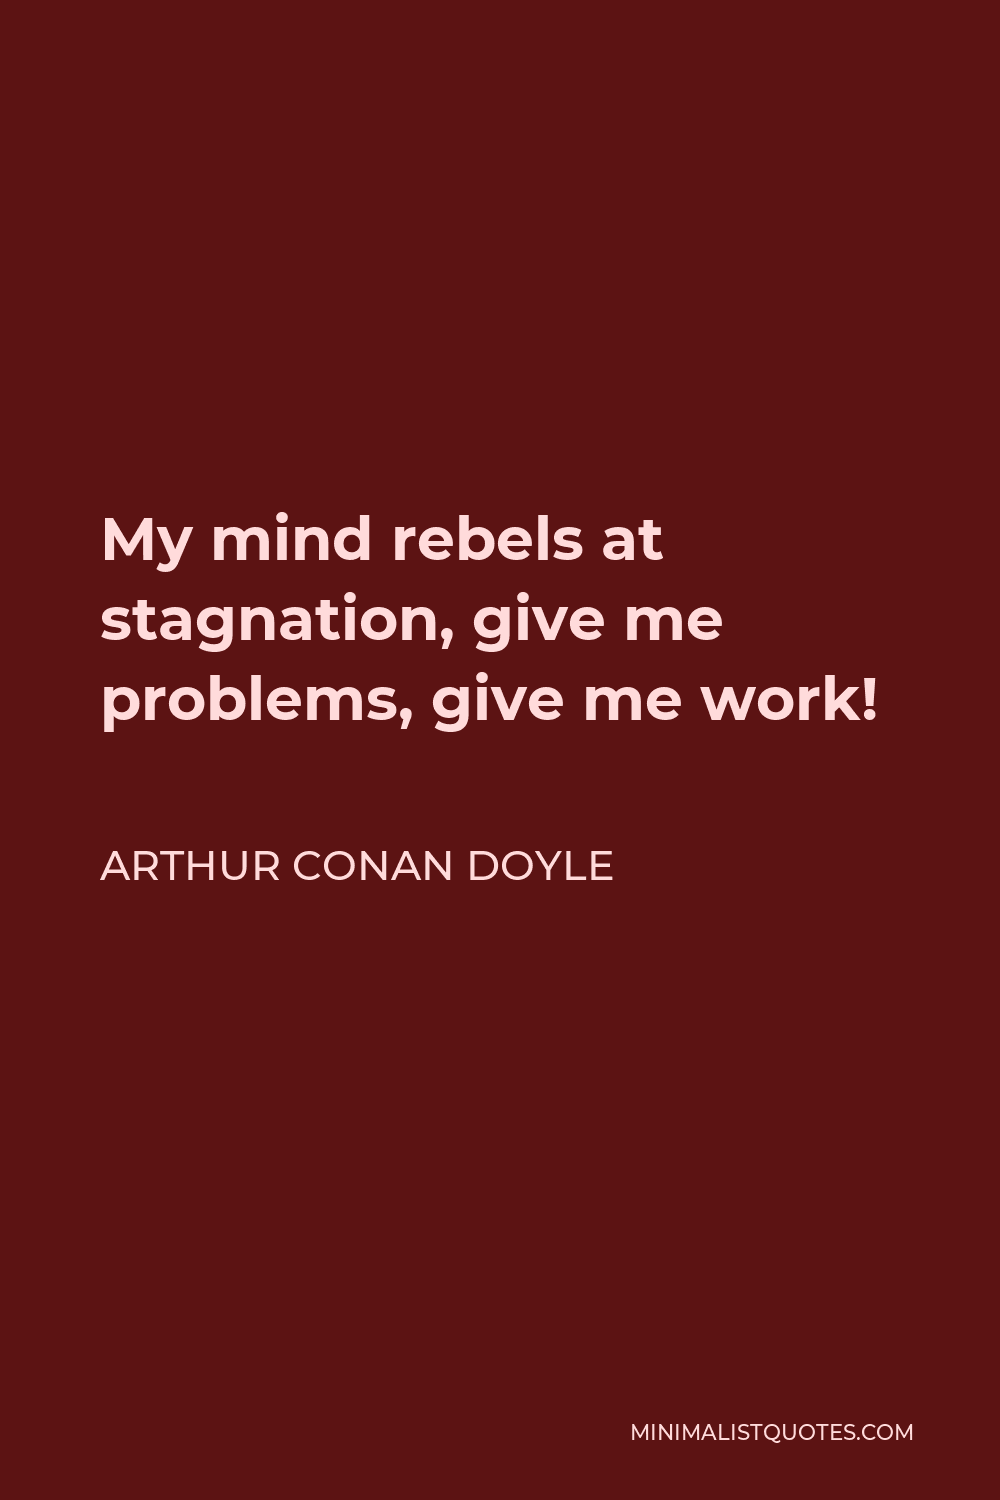 Arthur Conan Doyle Quote - My mind rebels at stagnation, give me problems, give me work!